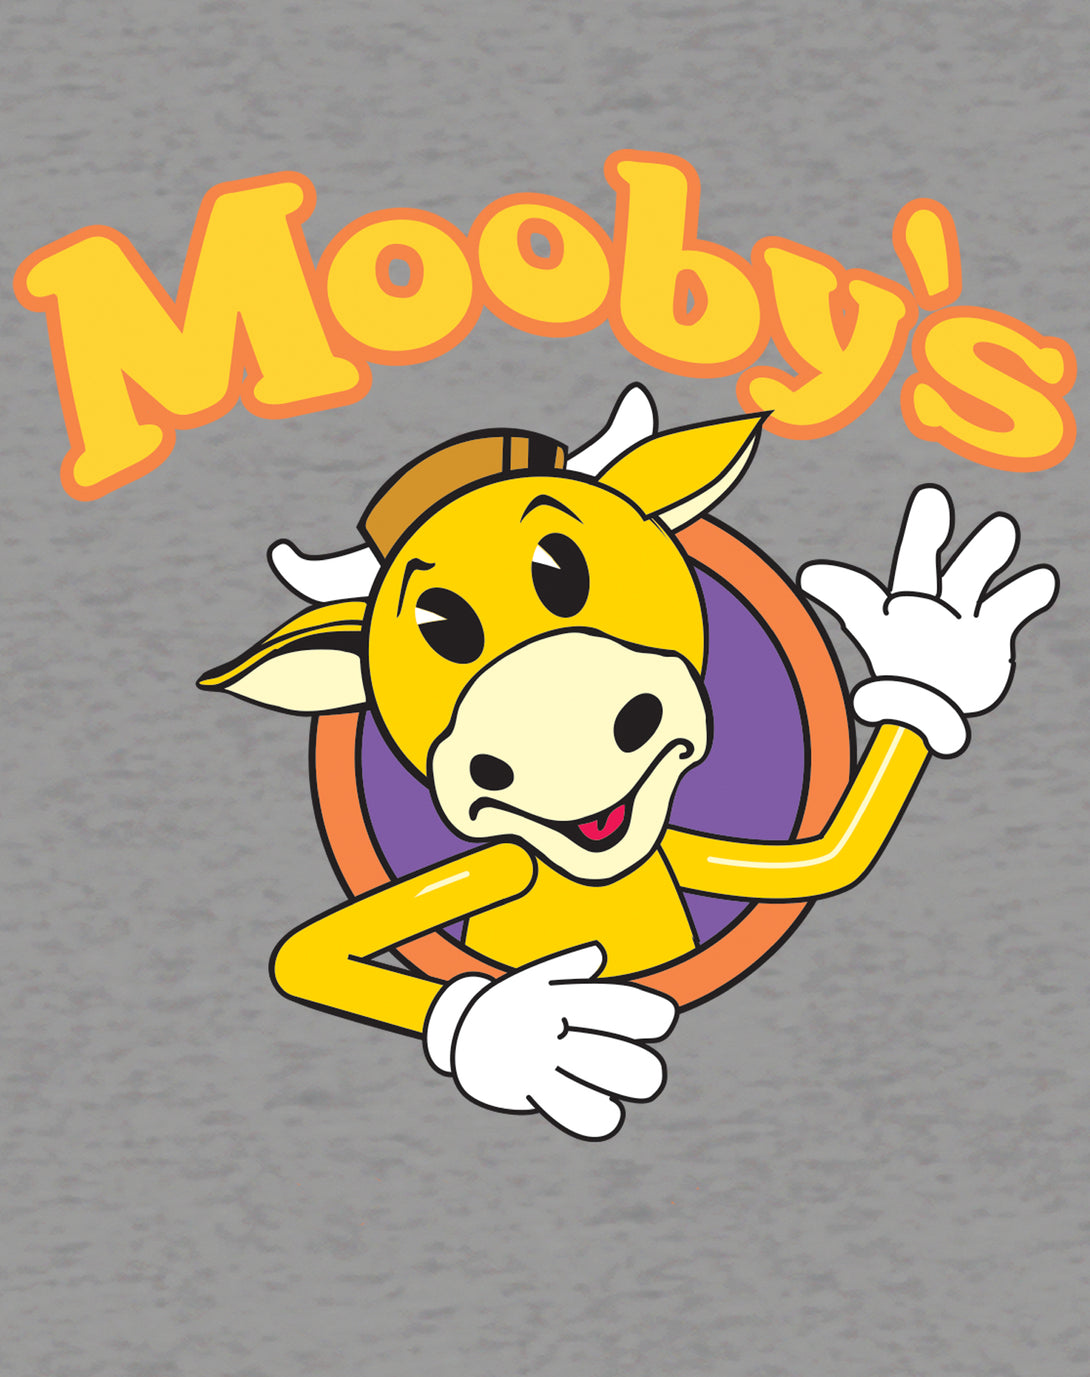 Kevin Smith View Askewniverse Mooby's Logo Official Men's T-Shirt Sports Grey - Urban Species Design Close Up